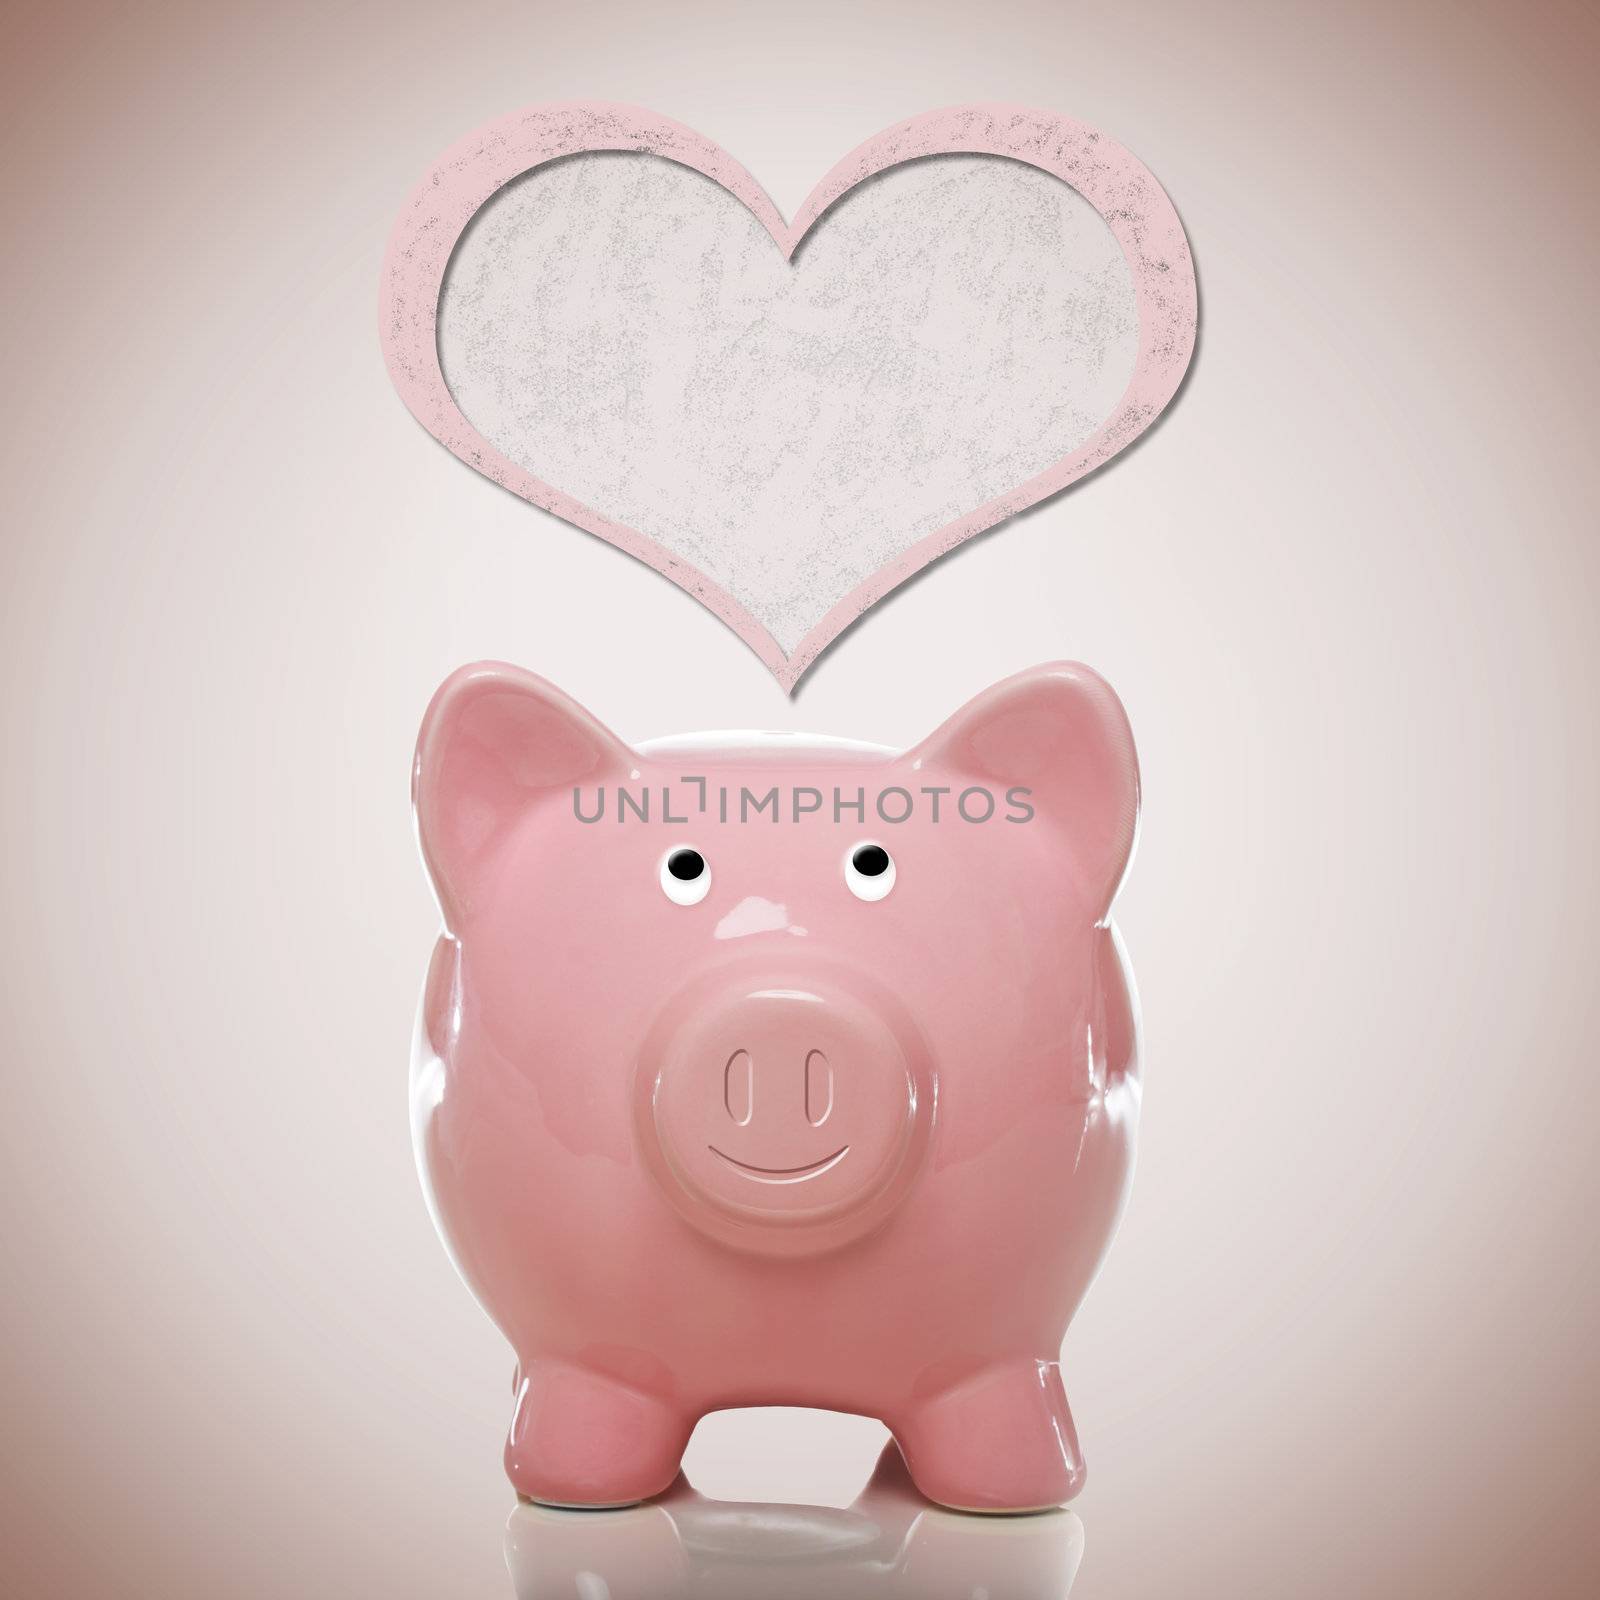 Happy piggy bank with pink heart on pink background